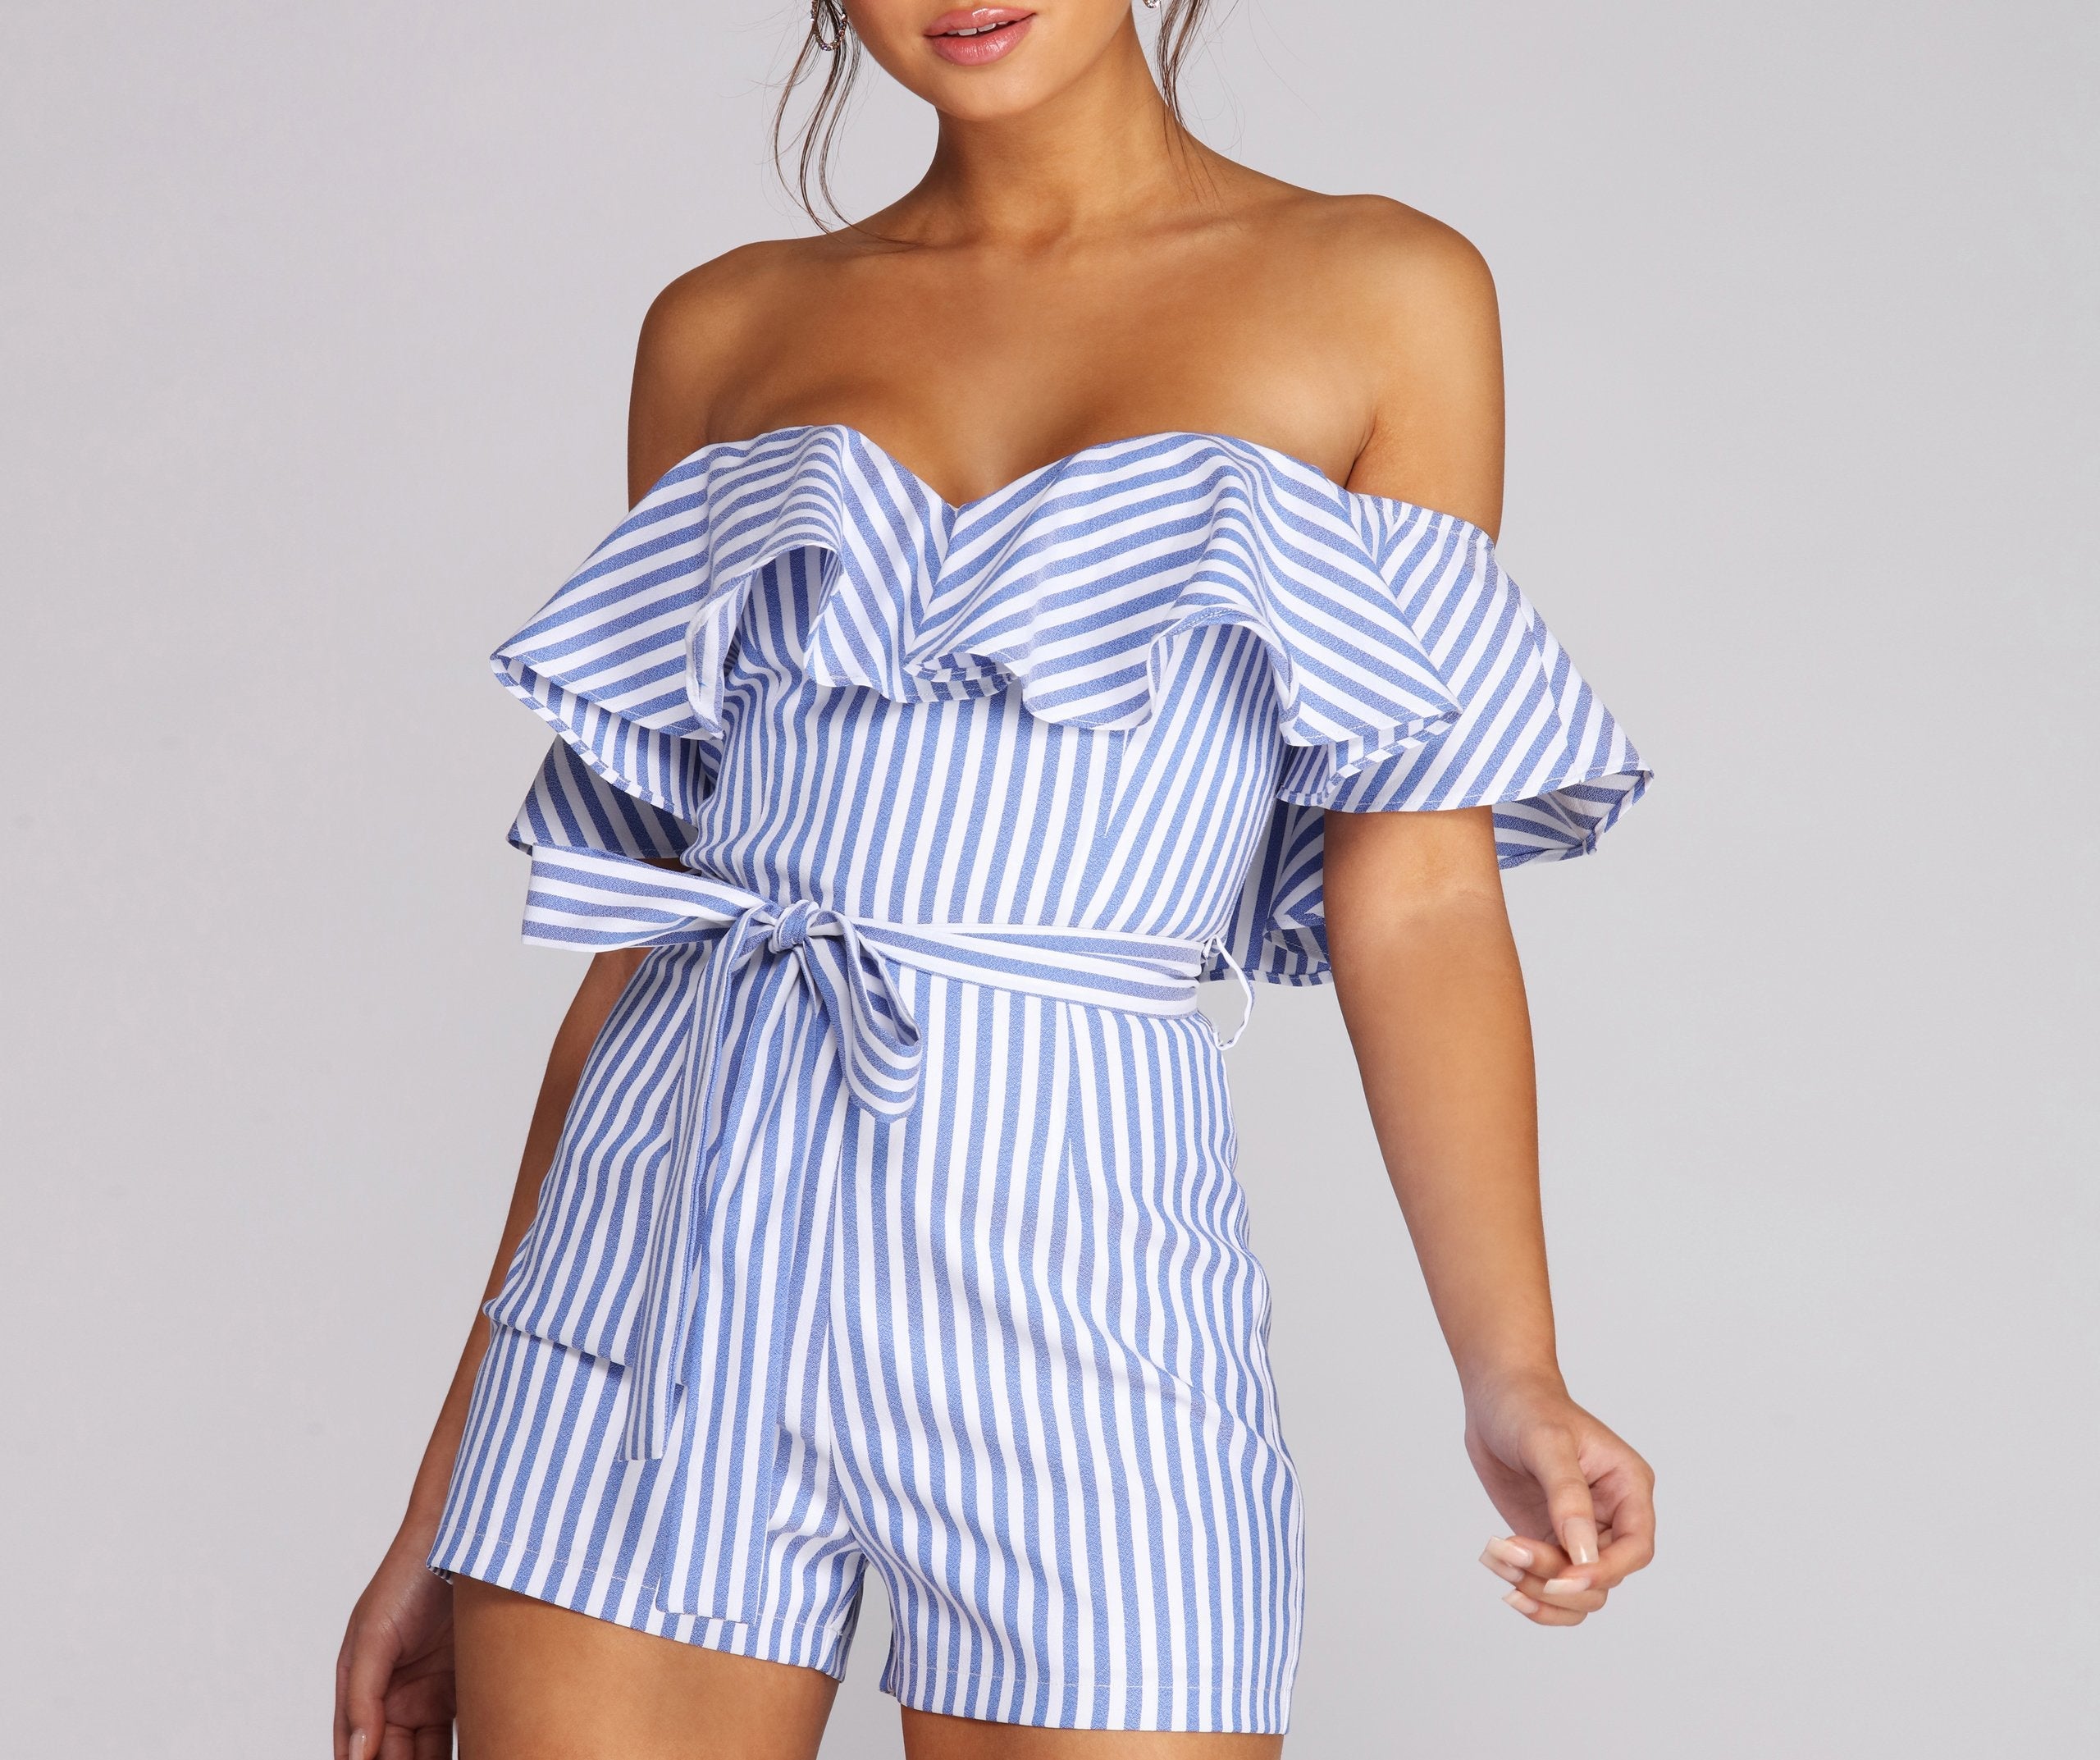 Ruffled And Striped Romper - Lady Occasions